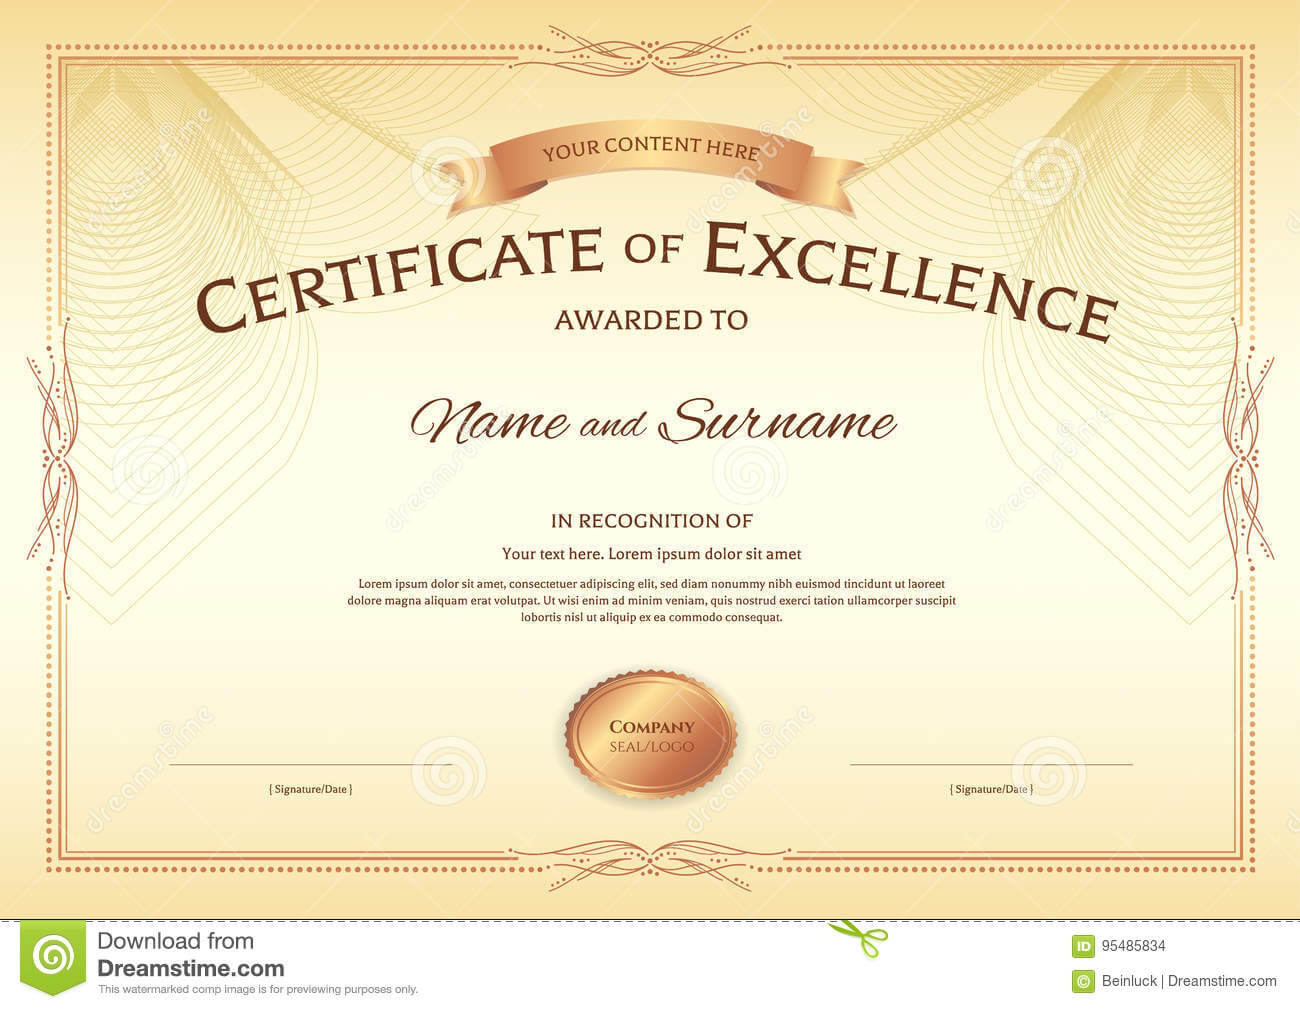 Certificate Of Excellence Template With Award Ribbon On Pertaining To Award Of Excellence Certificate Template